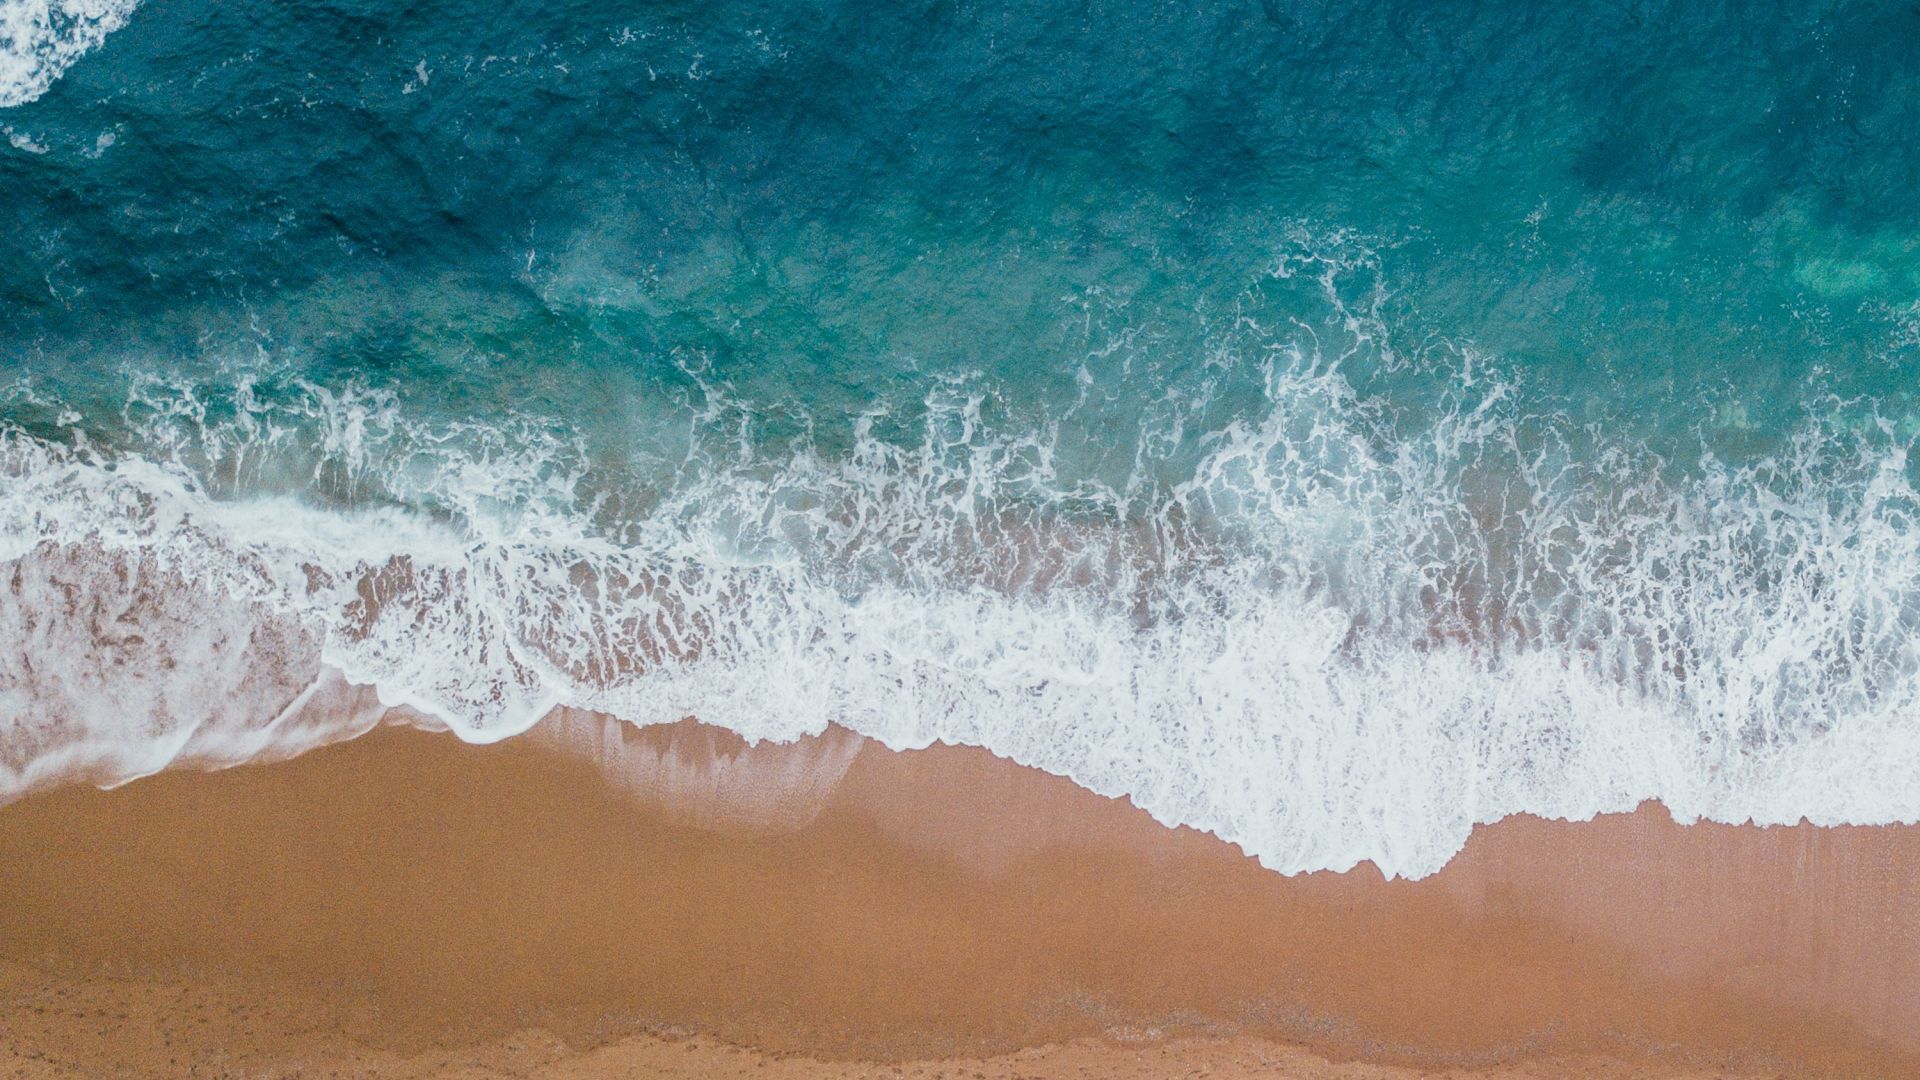 Desktop Wallpaper The Waves, Beach, Aerial View, Blue Sea, Hd Image, Picture, Background, D35103